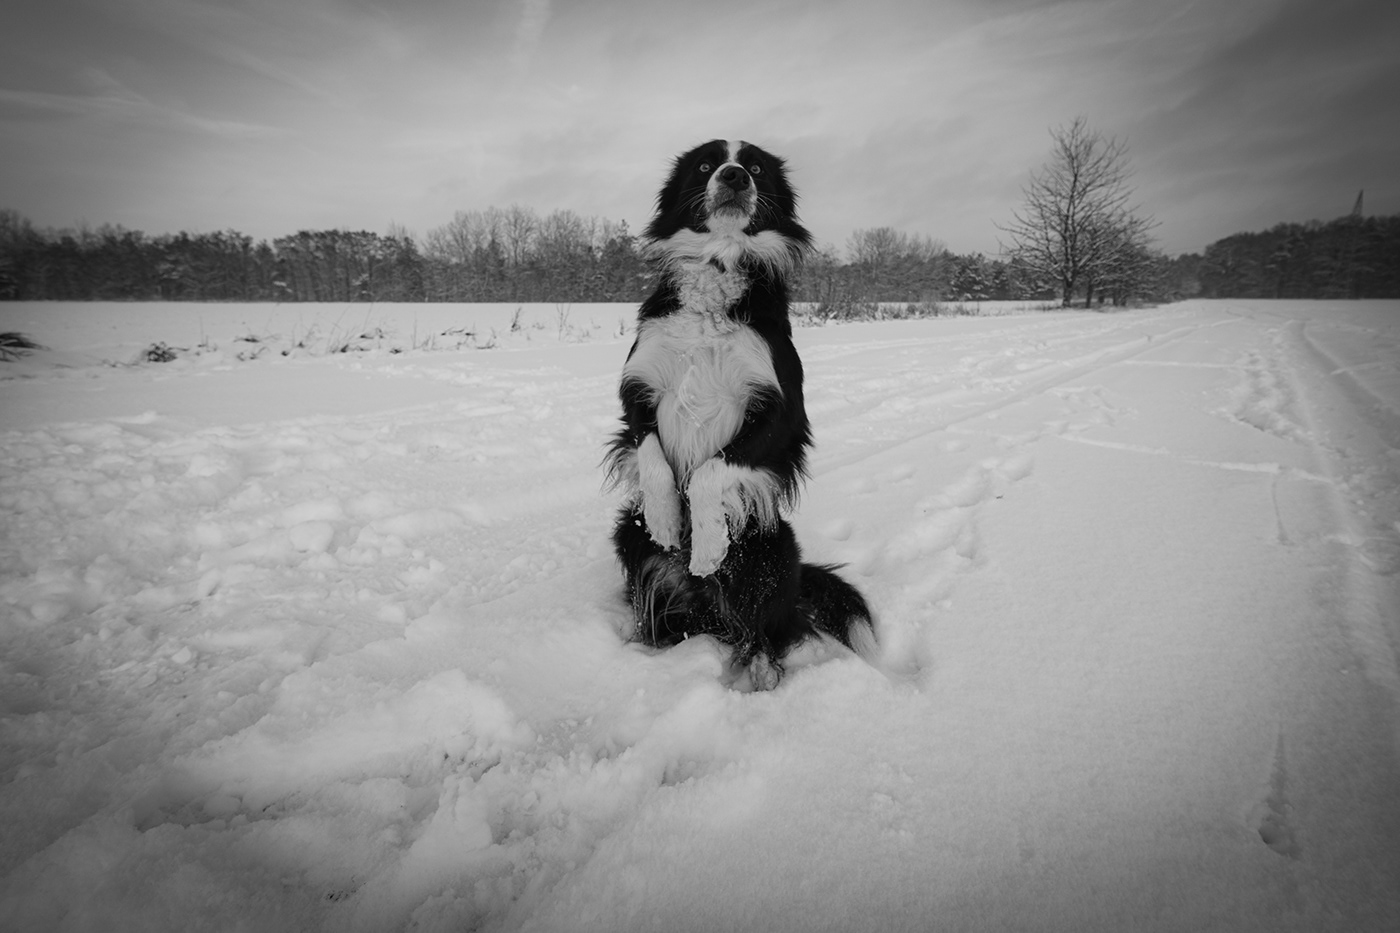 snow intelligent Active loyal Herd Breed obedience friendly family athletic Fur blackandwhite Agility bordercollie dog obedience training trainable workingdog